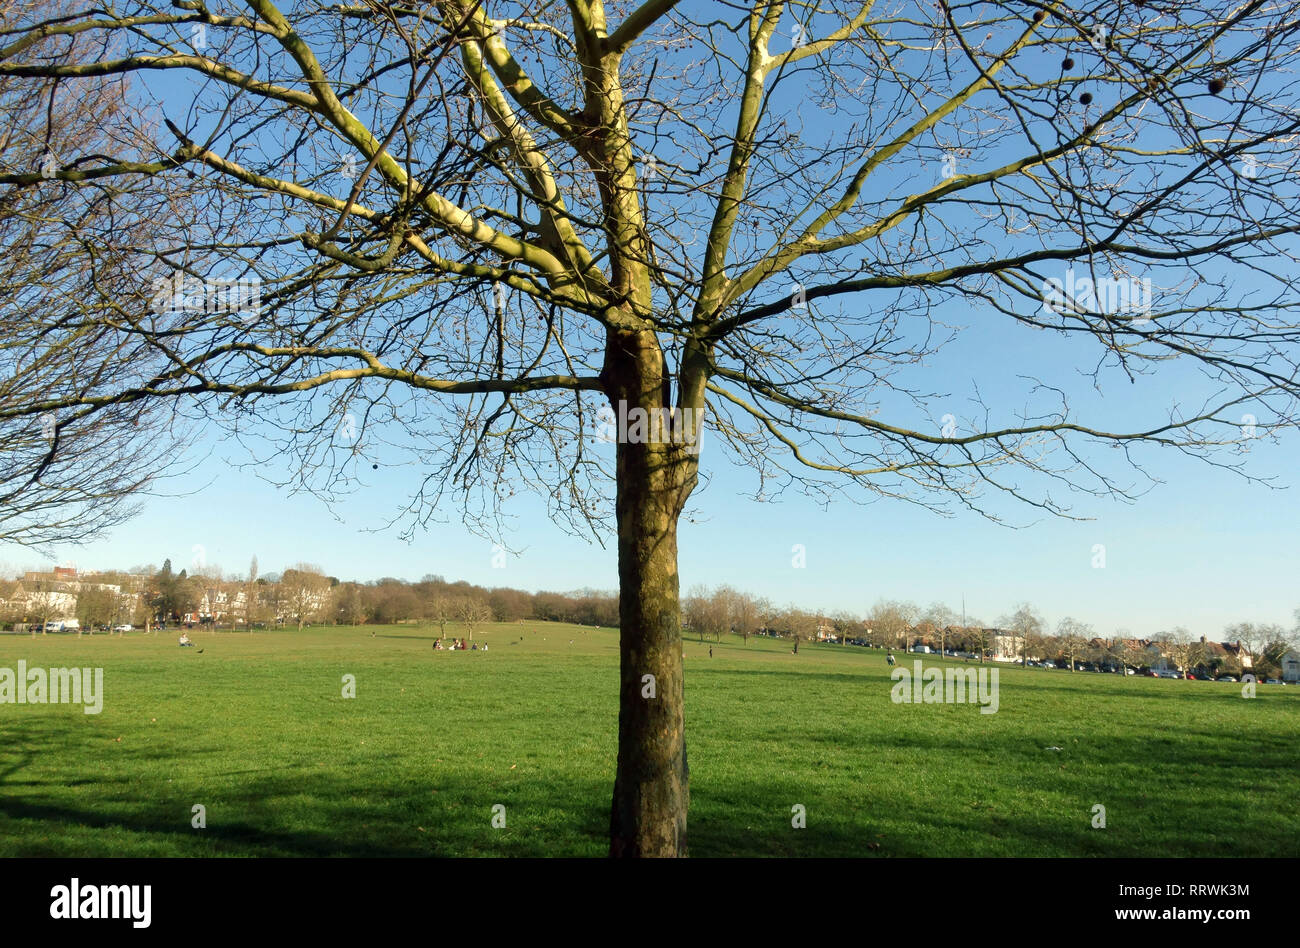 Streatham Common in South London Stock Photo